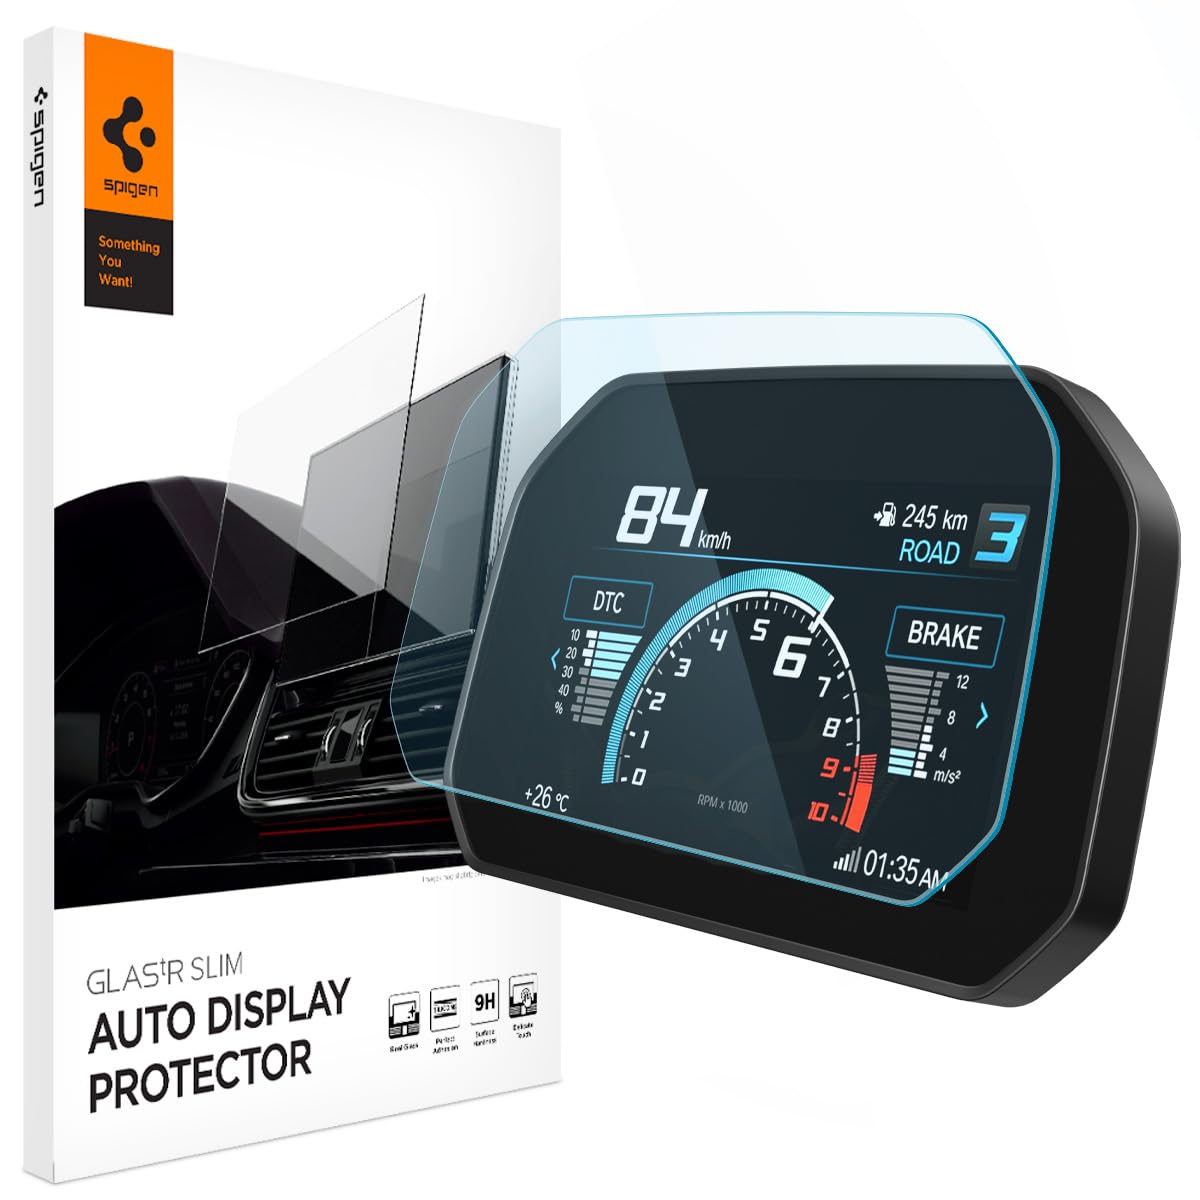 Spigen Tempered Glass Screen Protector [GlasTR Slim] designed for BMW R1250GS (2018/2019/2020/2021/2022/2023) 6.5 inch Touchscreen - Crystal Clear